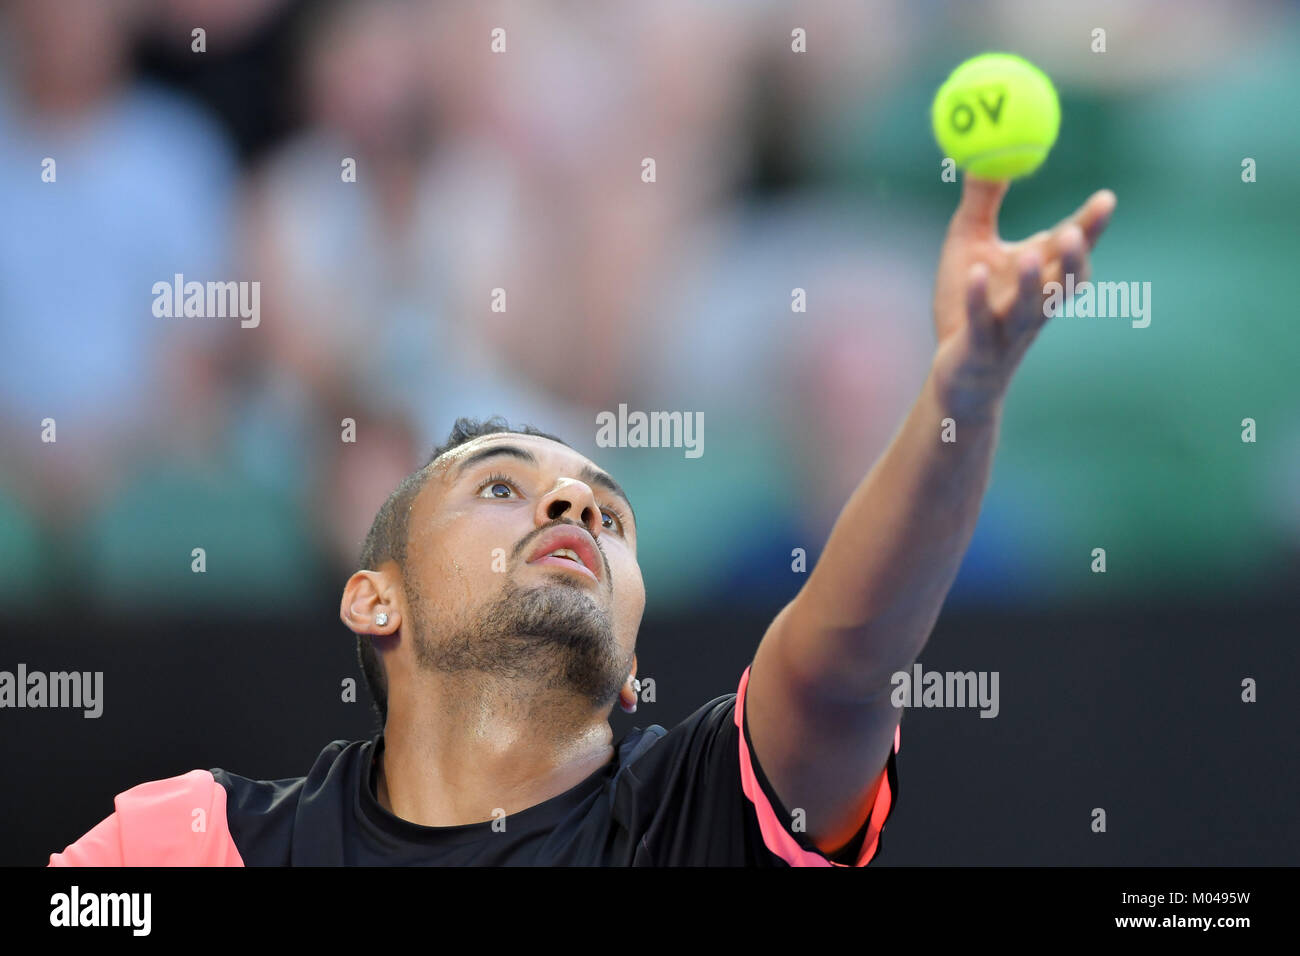 Melbourne, Australia. 19th Jan, 2018. Nick Kyrgios of Australia in action in a 3rd round match against 17th seed 15th seed Jo-Wilfried Tsonga of France on day five of the 2018 Australian Open Grand Slam tennis tournament in Melbourne, Australia. Nadal won 61 63 61. Credit: Cal Sport Media/Alamy Live News Stock Photo